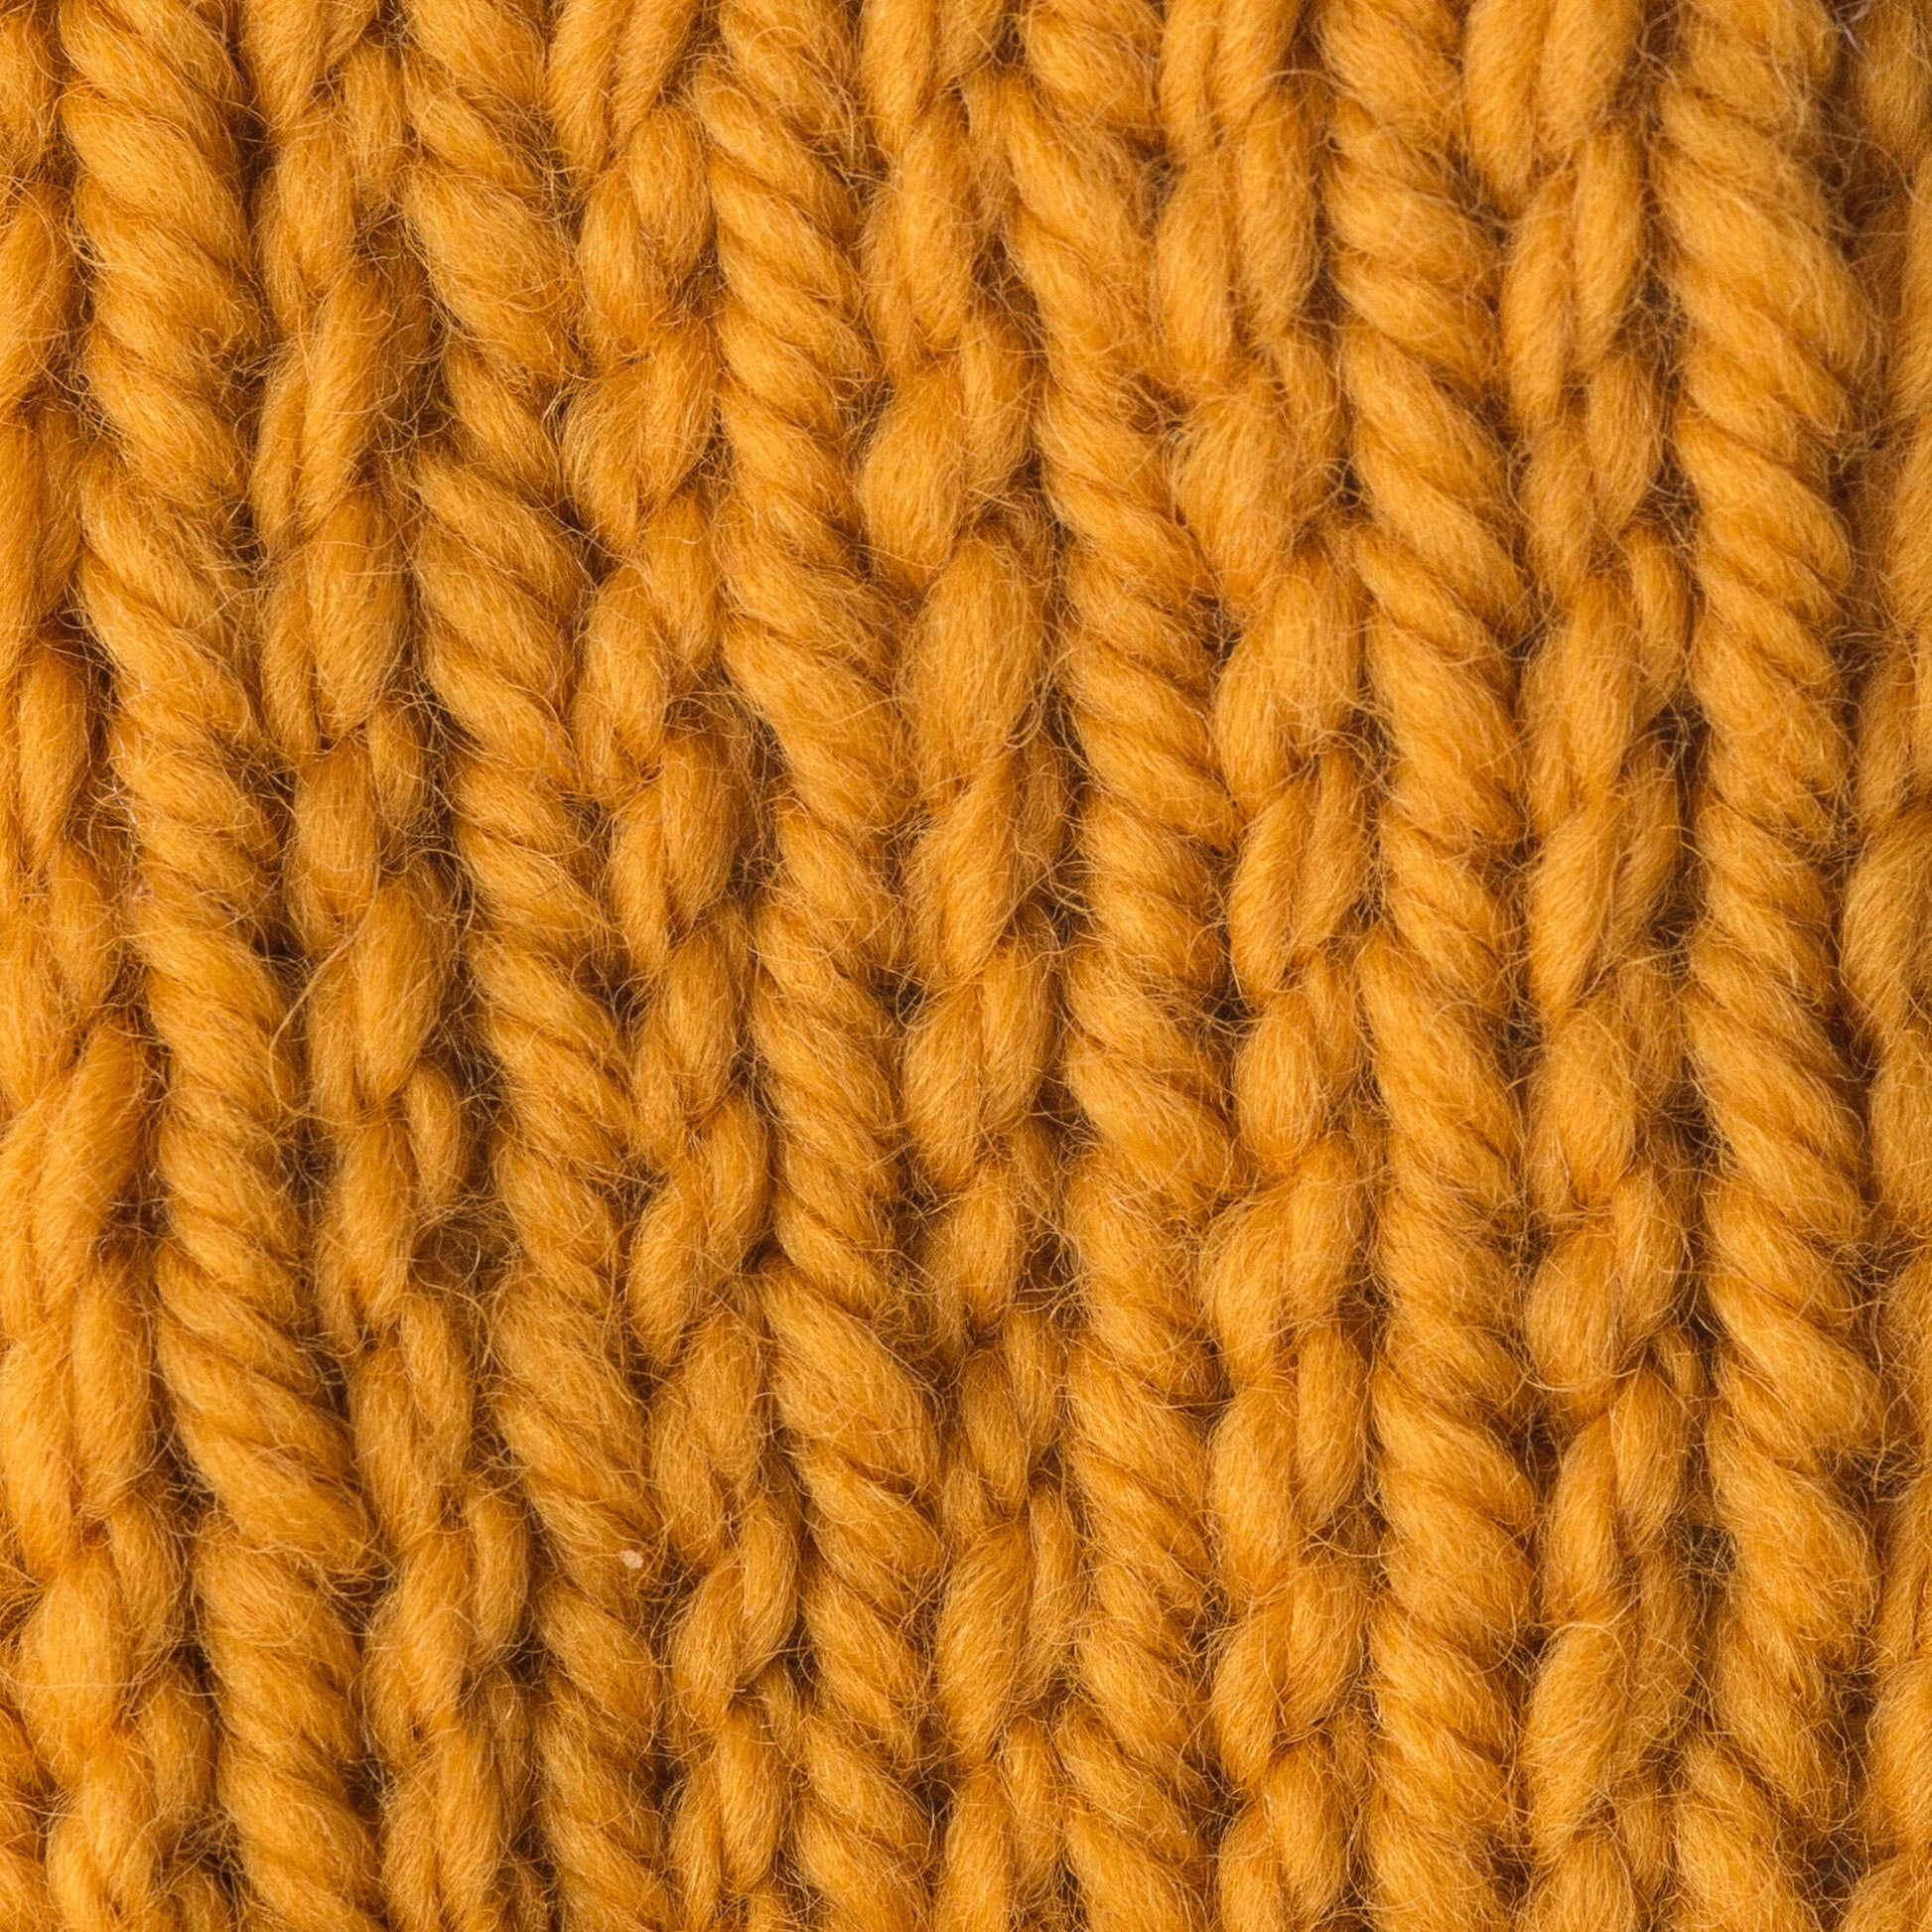 Patons Classic Wool Bulky Yarn - Discontinued Shades Gold